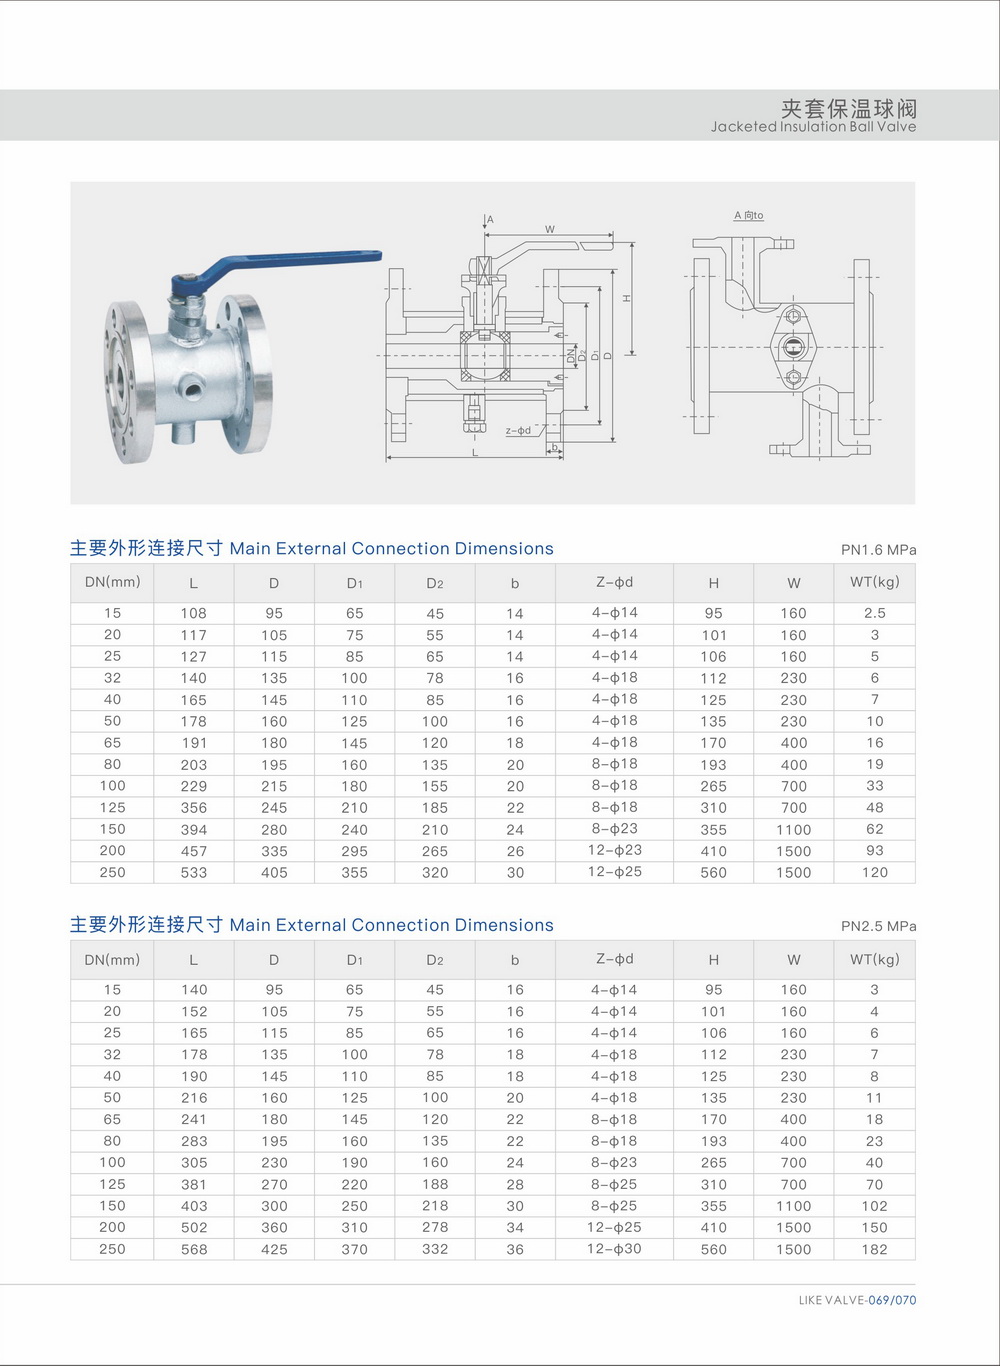 11 Jacketed Insulated Ball Valve-2.jpg